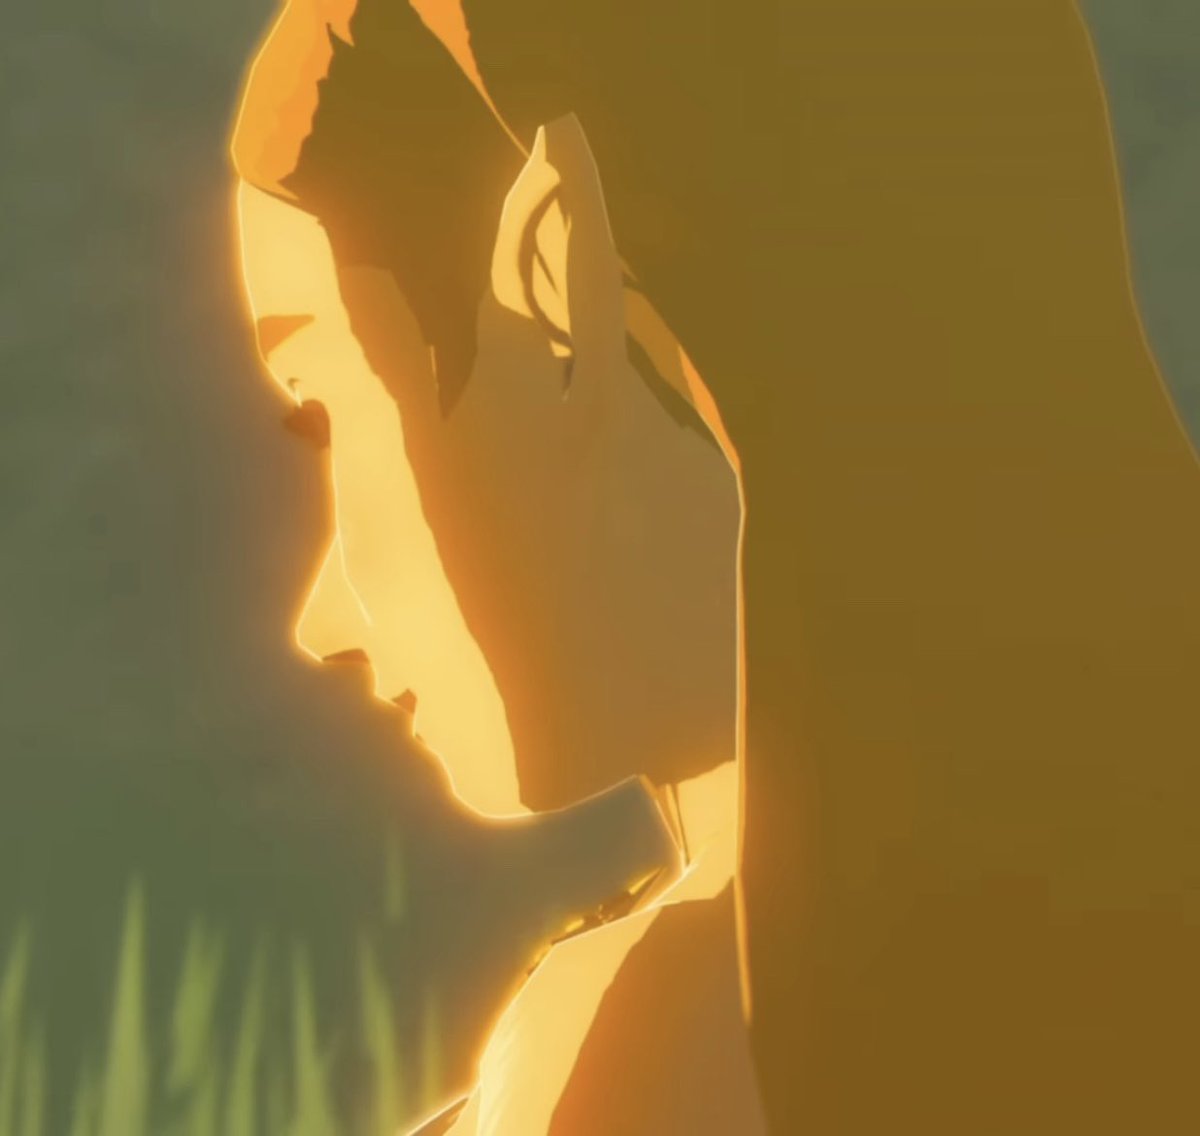 the way that they look at each other… zelink is real im afraid